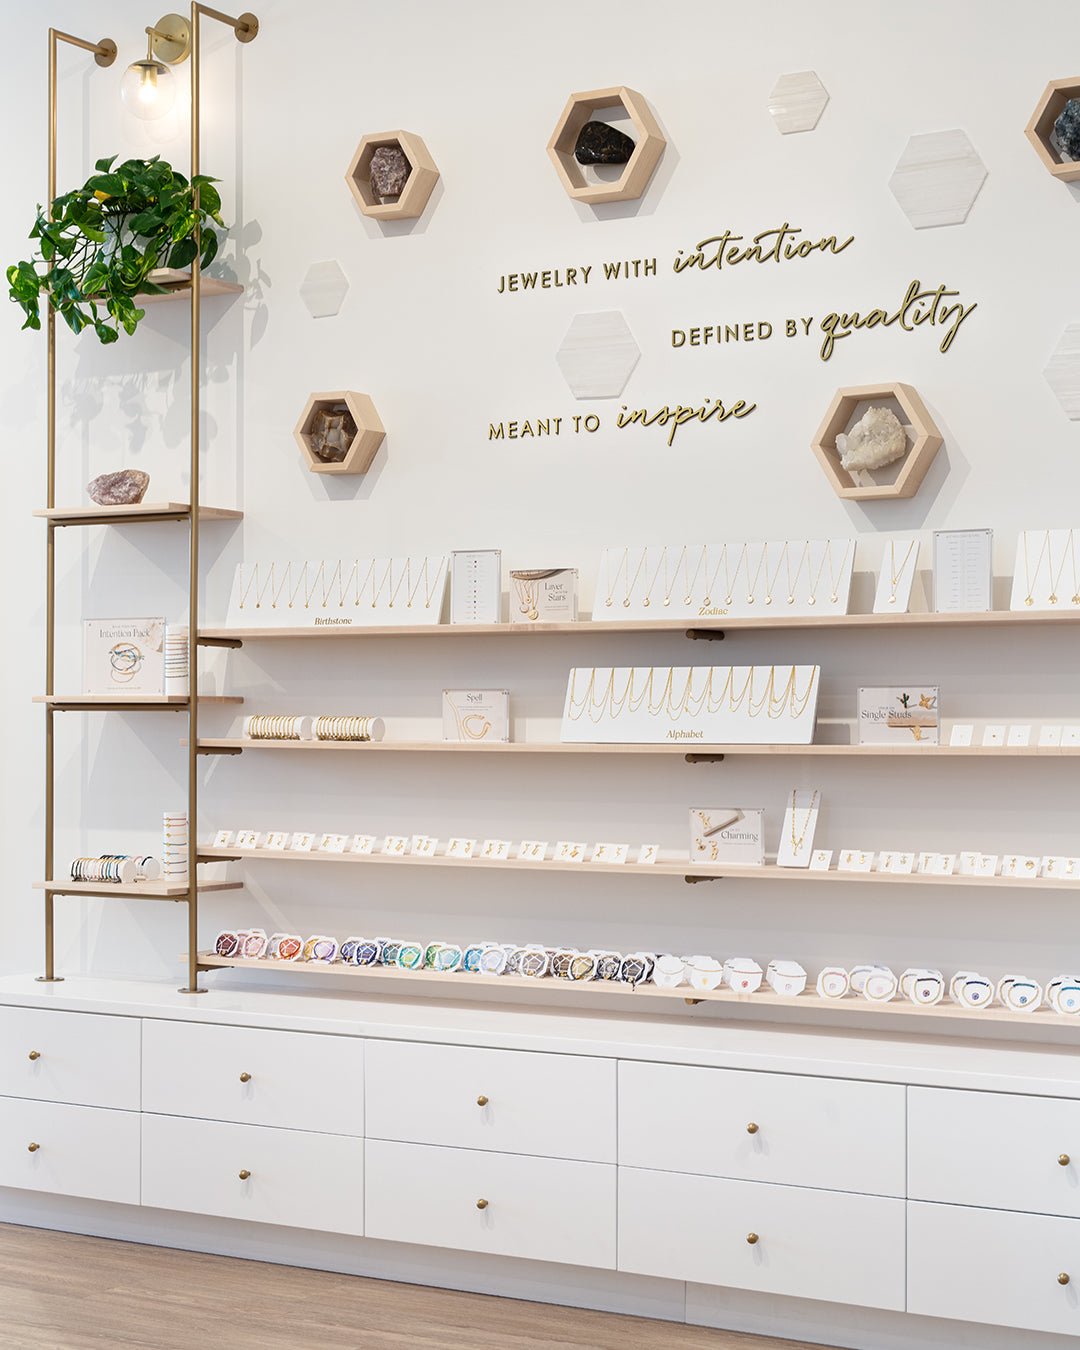 Interior of store with white wall filled with jewelry shelves and cases below